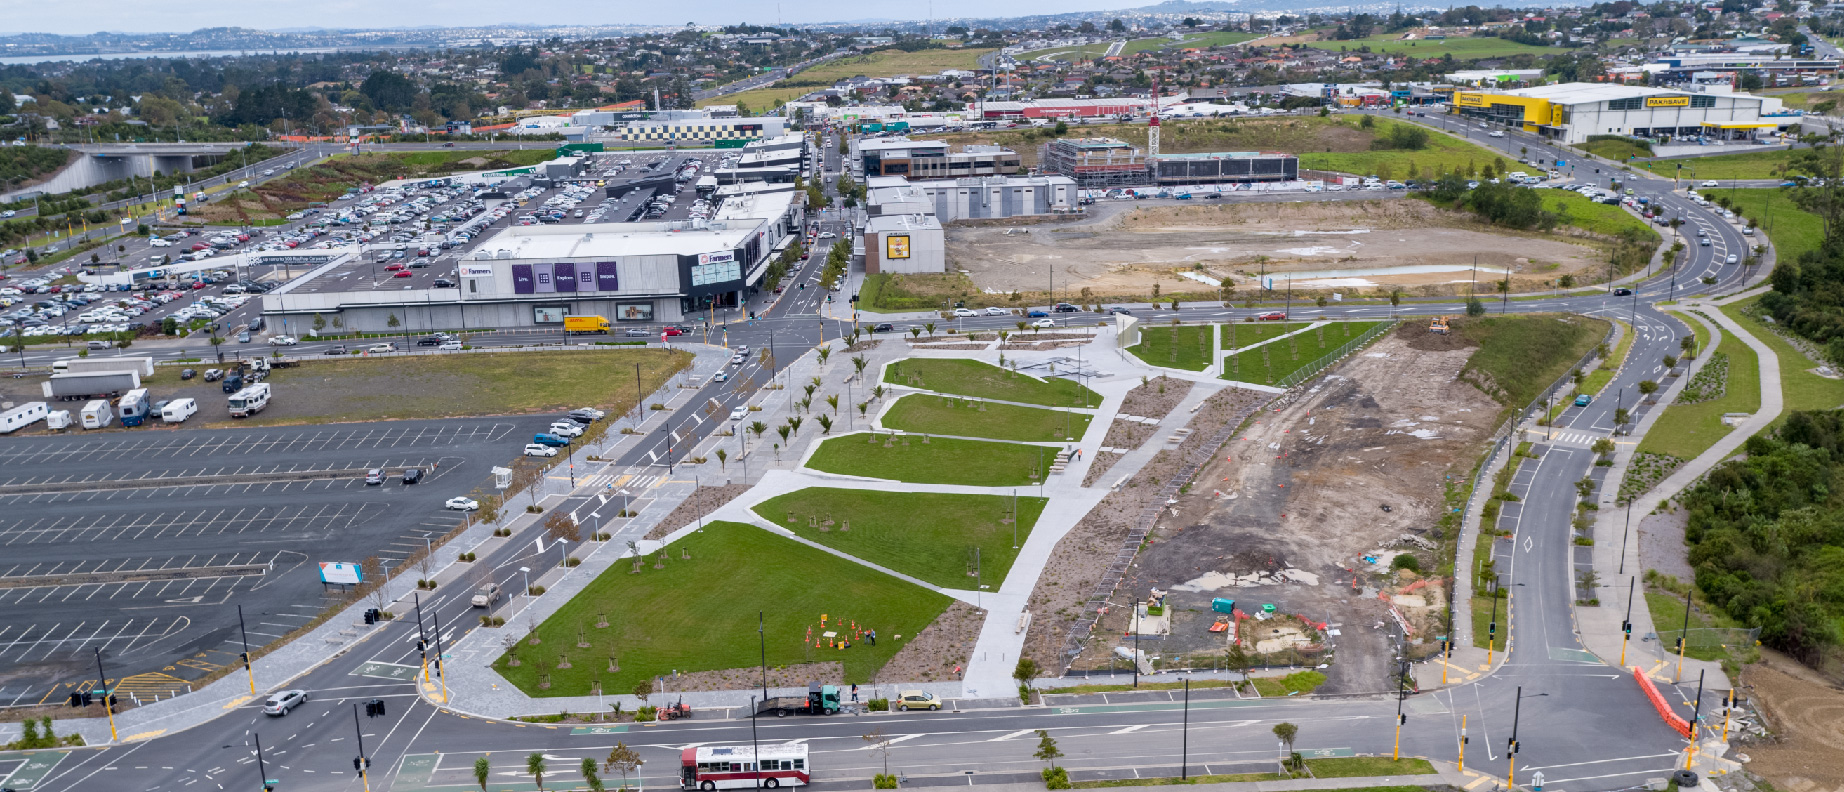 Photograph of construction underway at a future commercial area